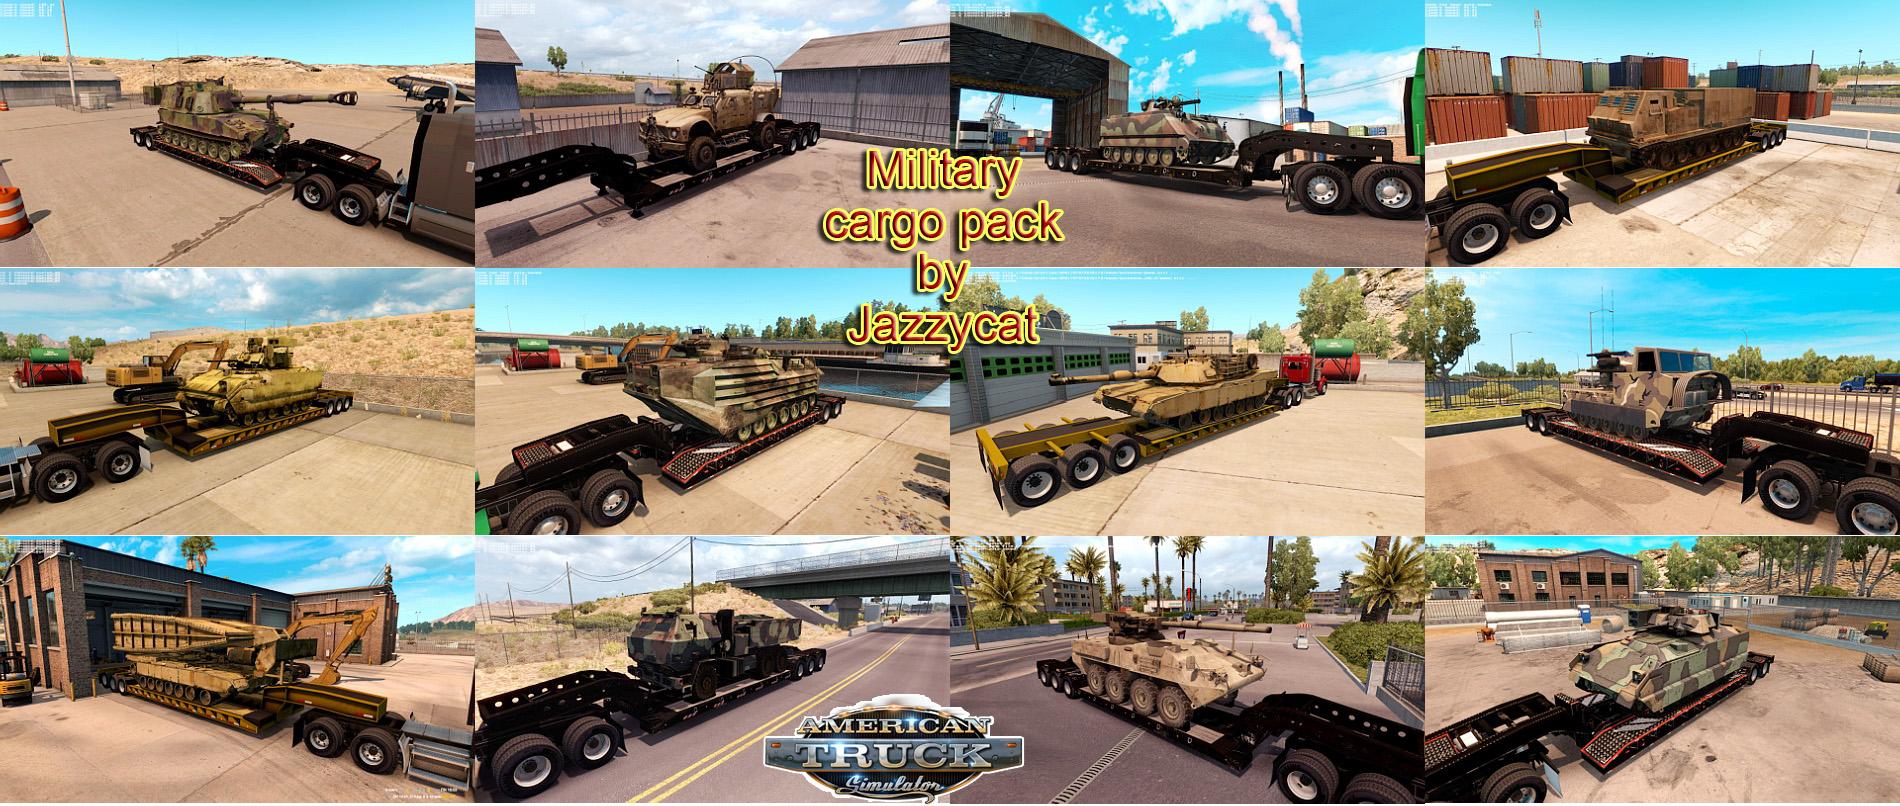 MILITARY CARGO PACK BY JAZZYCAT V1.0.2 ATS Euro Truck Simulator 2 Mods